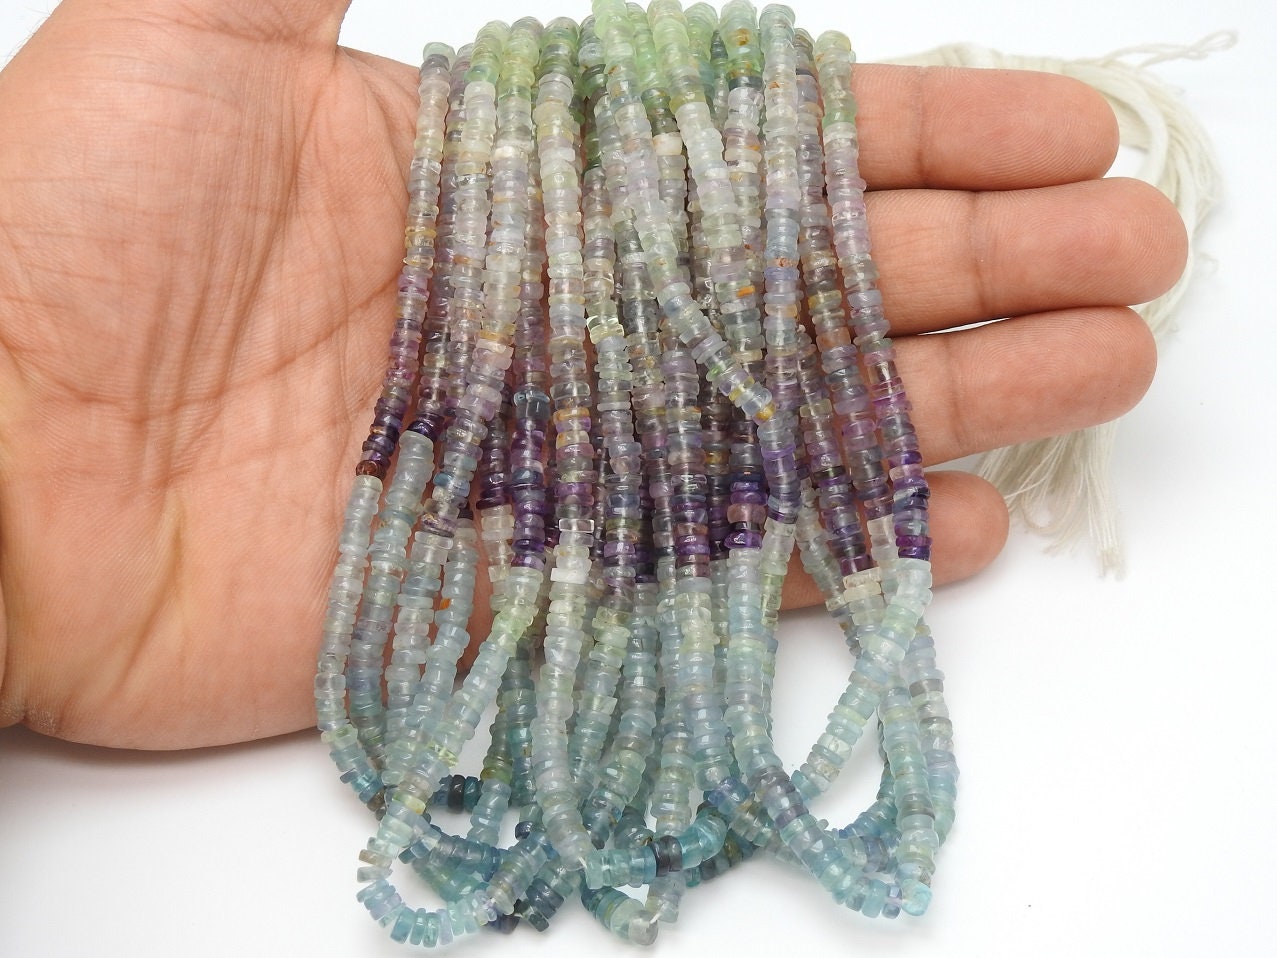 Fluorite Smooth Tyre,Coin,Button,Wheel Beads,Multi Shaded,Handmade,Loose Stone,Wholesaler,Supplies,16Inch 5MM Approx,100%Natural PME-T1 | Save 33% - Rajasthan Living 12